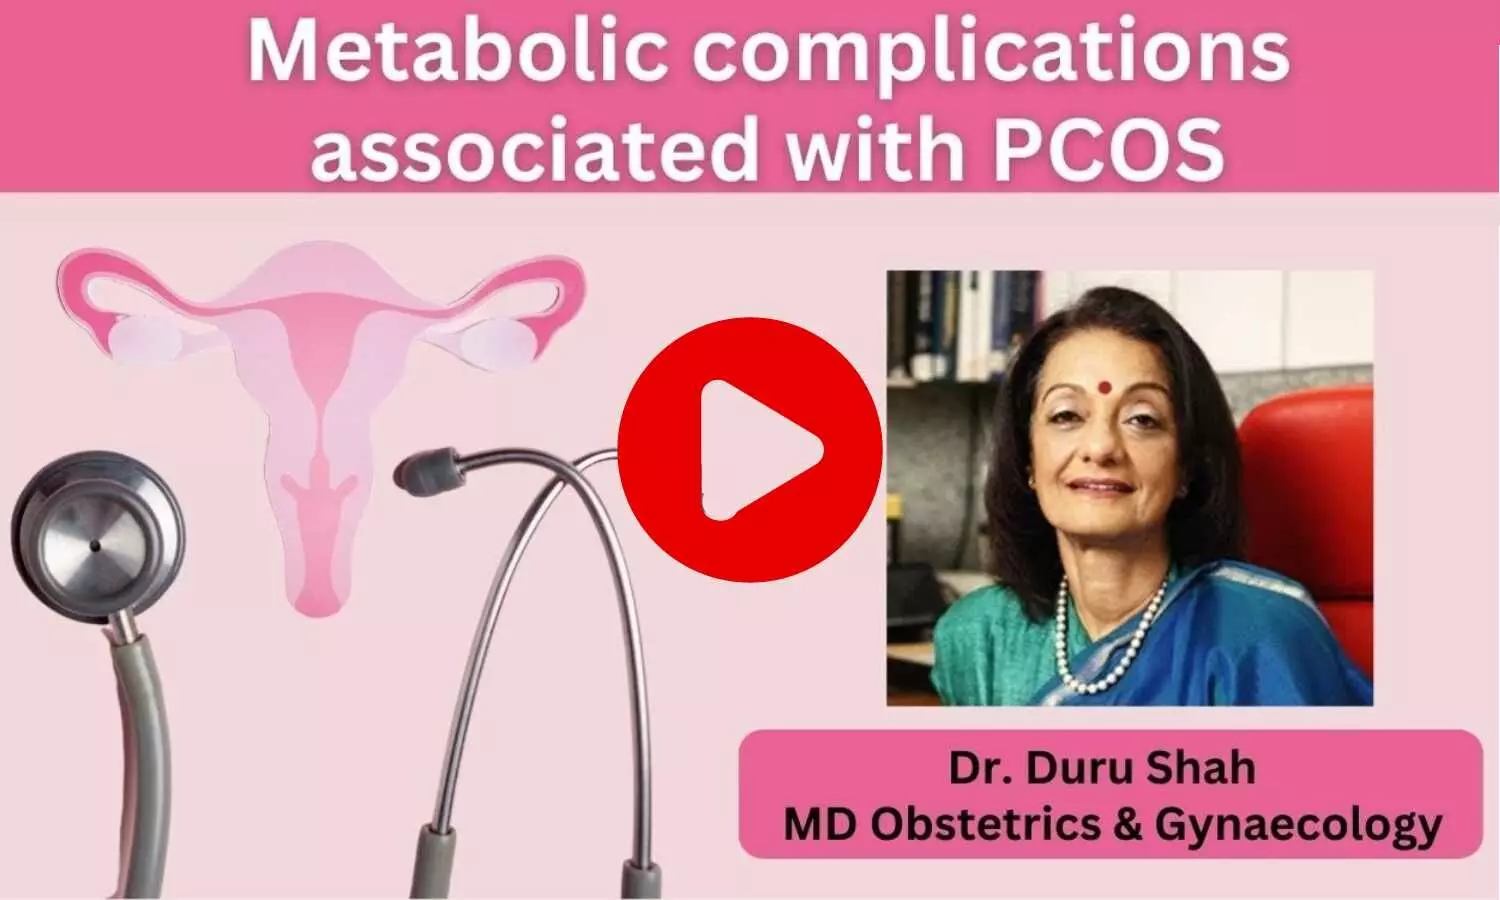 Relationship of Obesity, T2DM with PCOS- Ft. Dr. Duru Shah, MD (Obstetrics & Gynaecology)